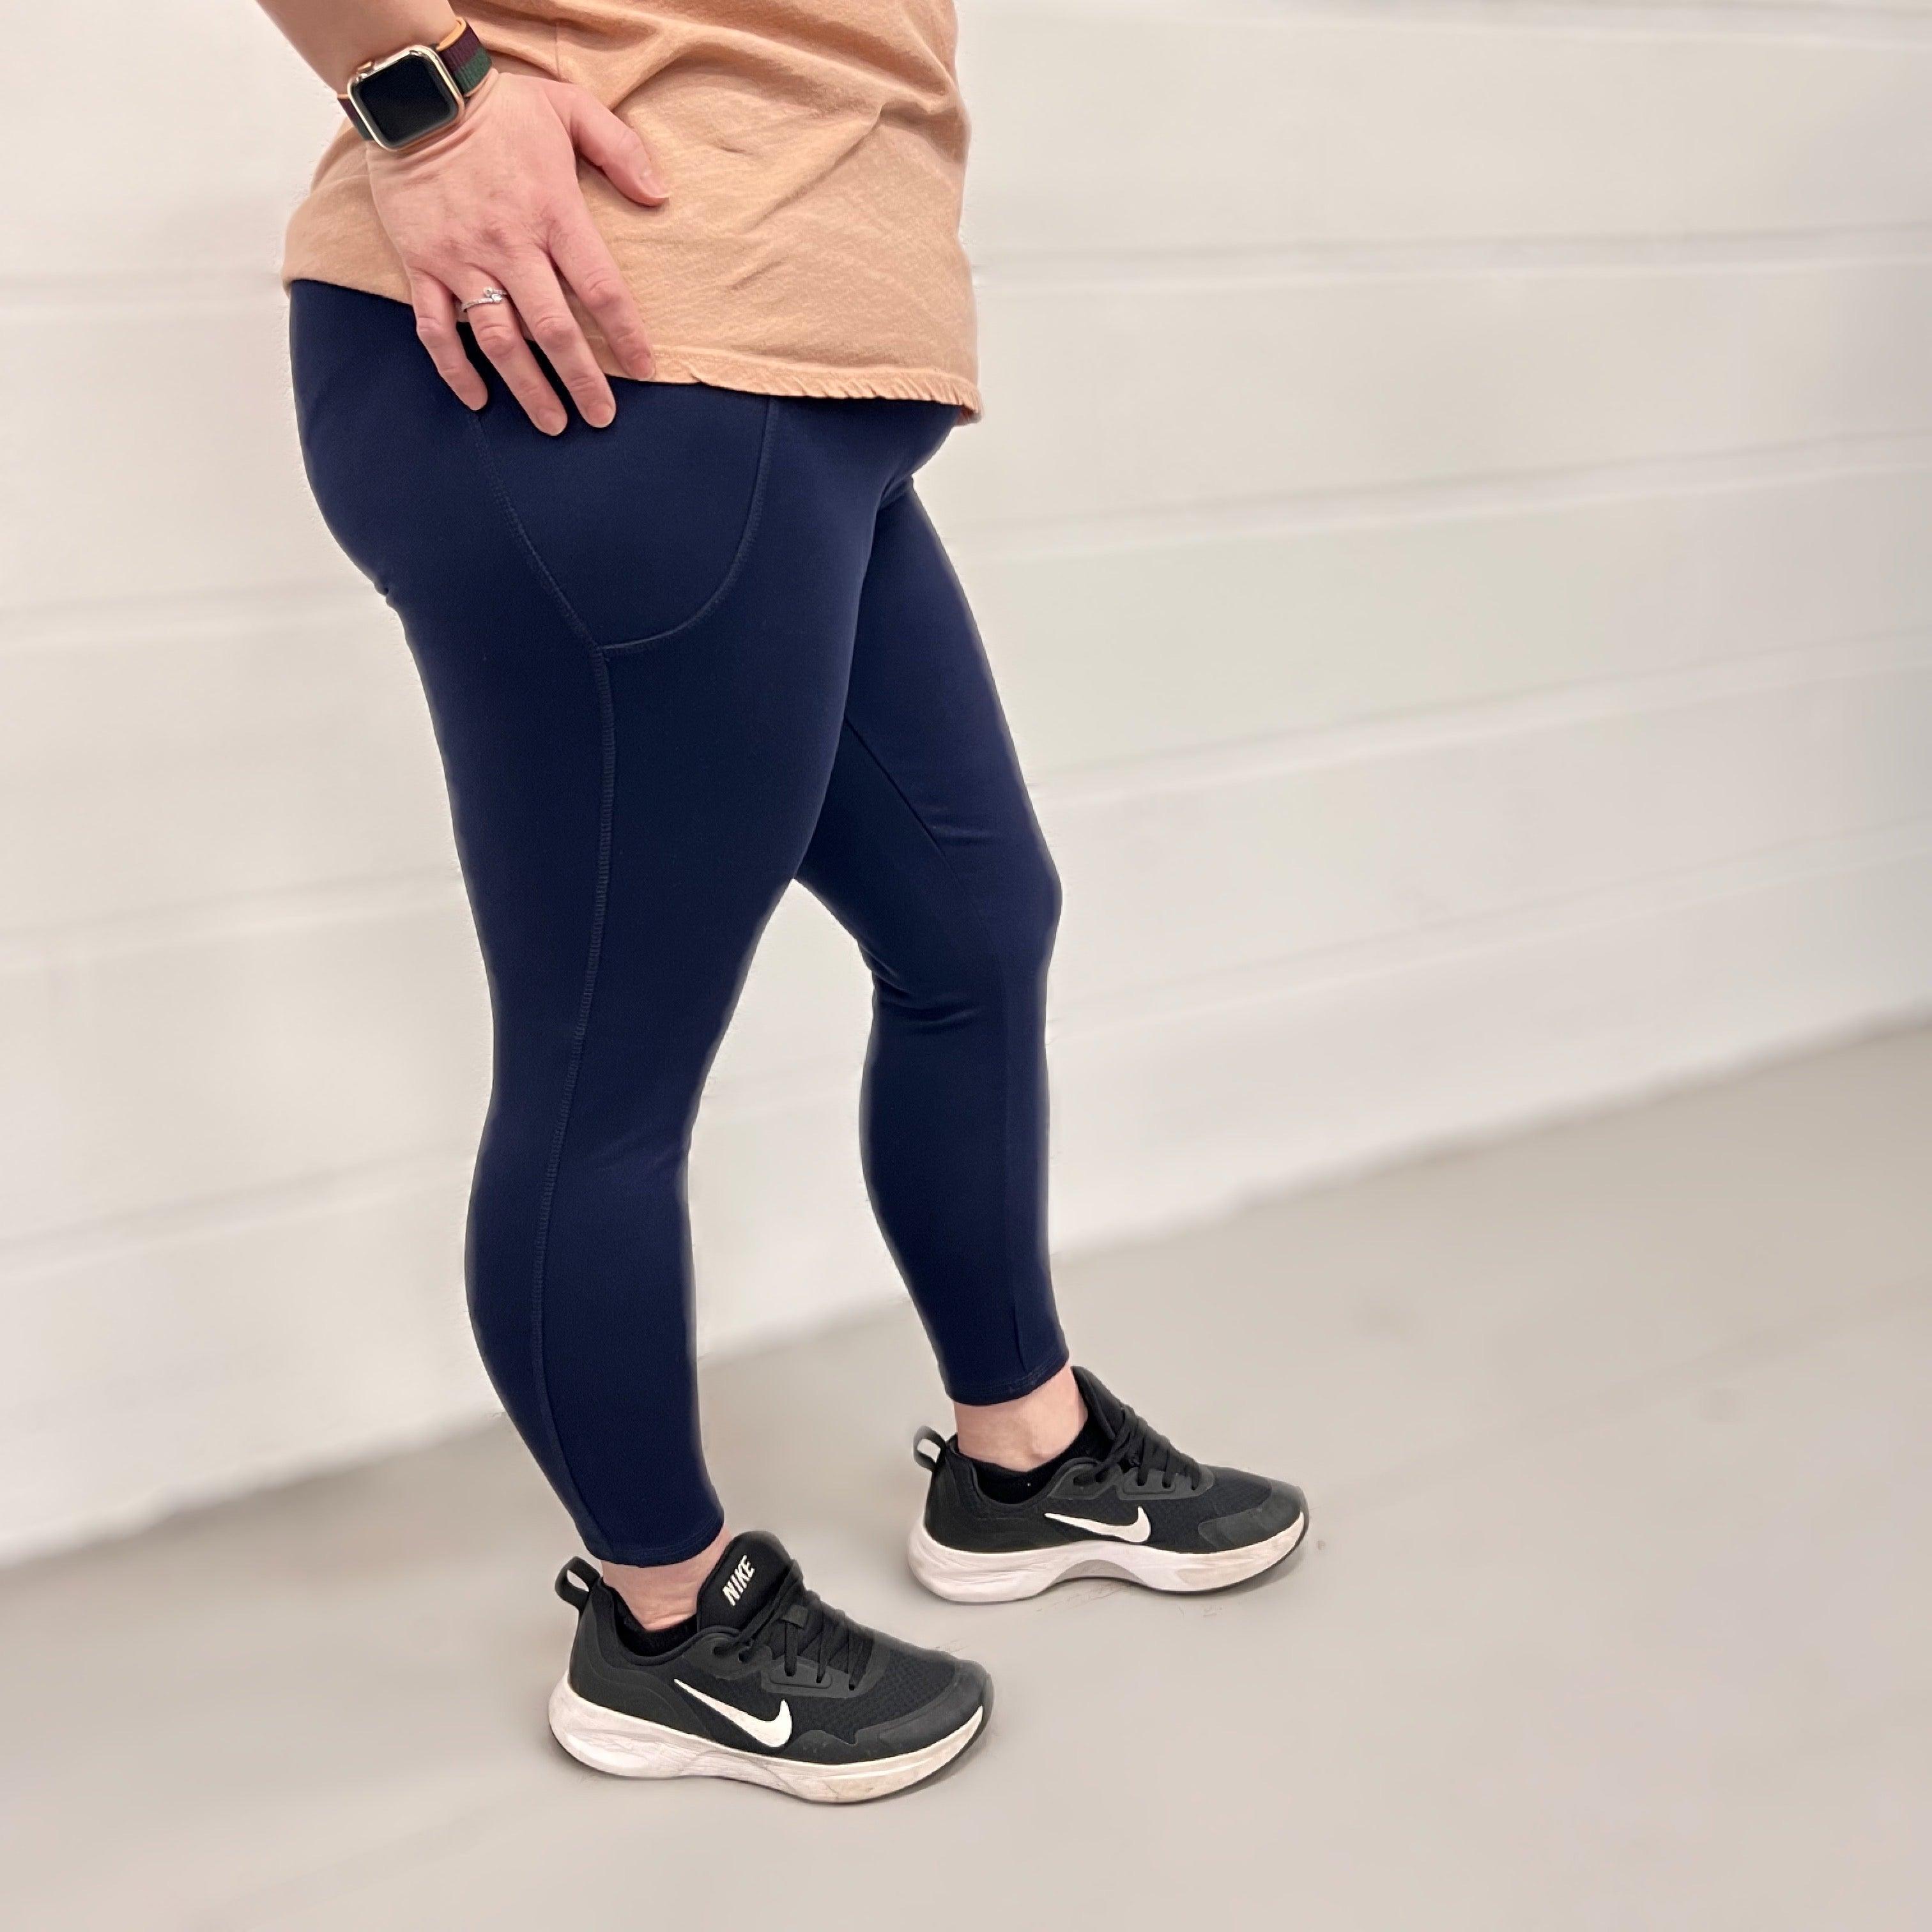 Black Plus Size Lycra Fabric High Waist Yoga Leggings For Women, Solid  Color Elastic Fitness Lady Outdoor Sports Trousers From Topstore1103,  $22.62 | DHgate.Com